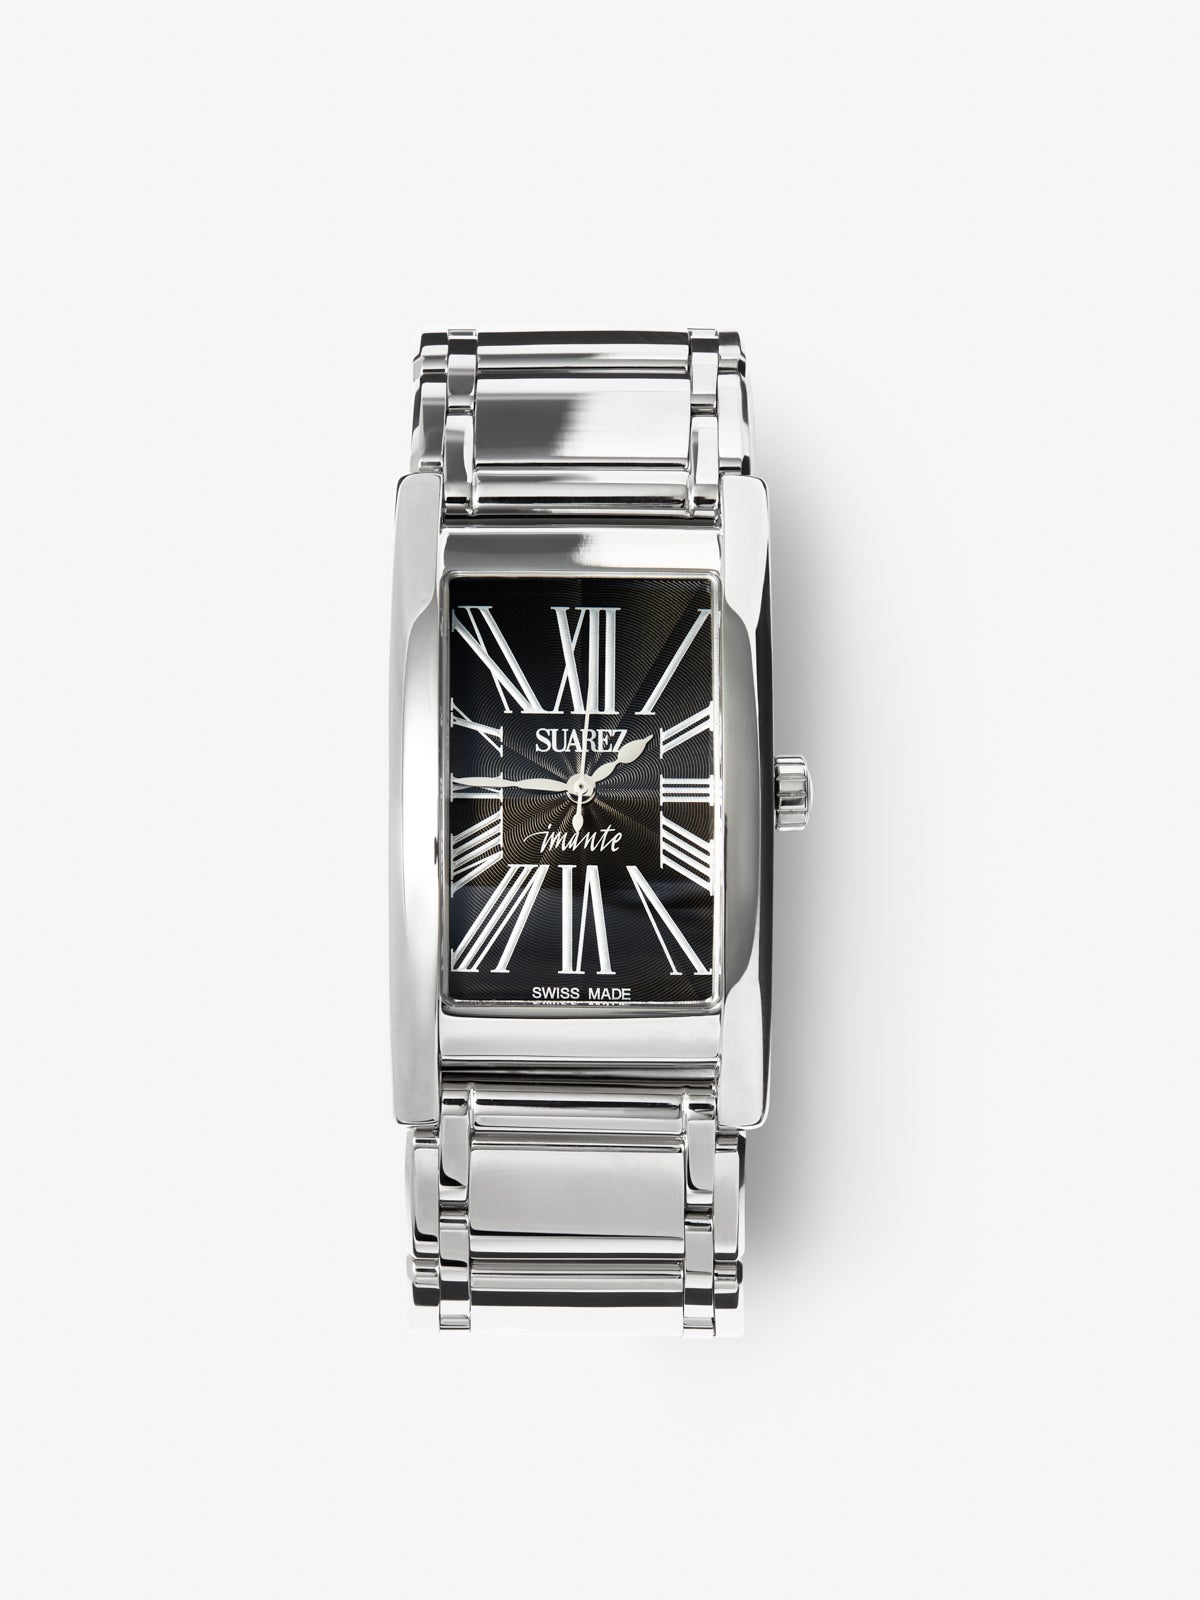 Stainless steel watch with sapphire glass and quartz movement